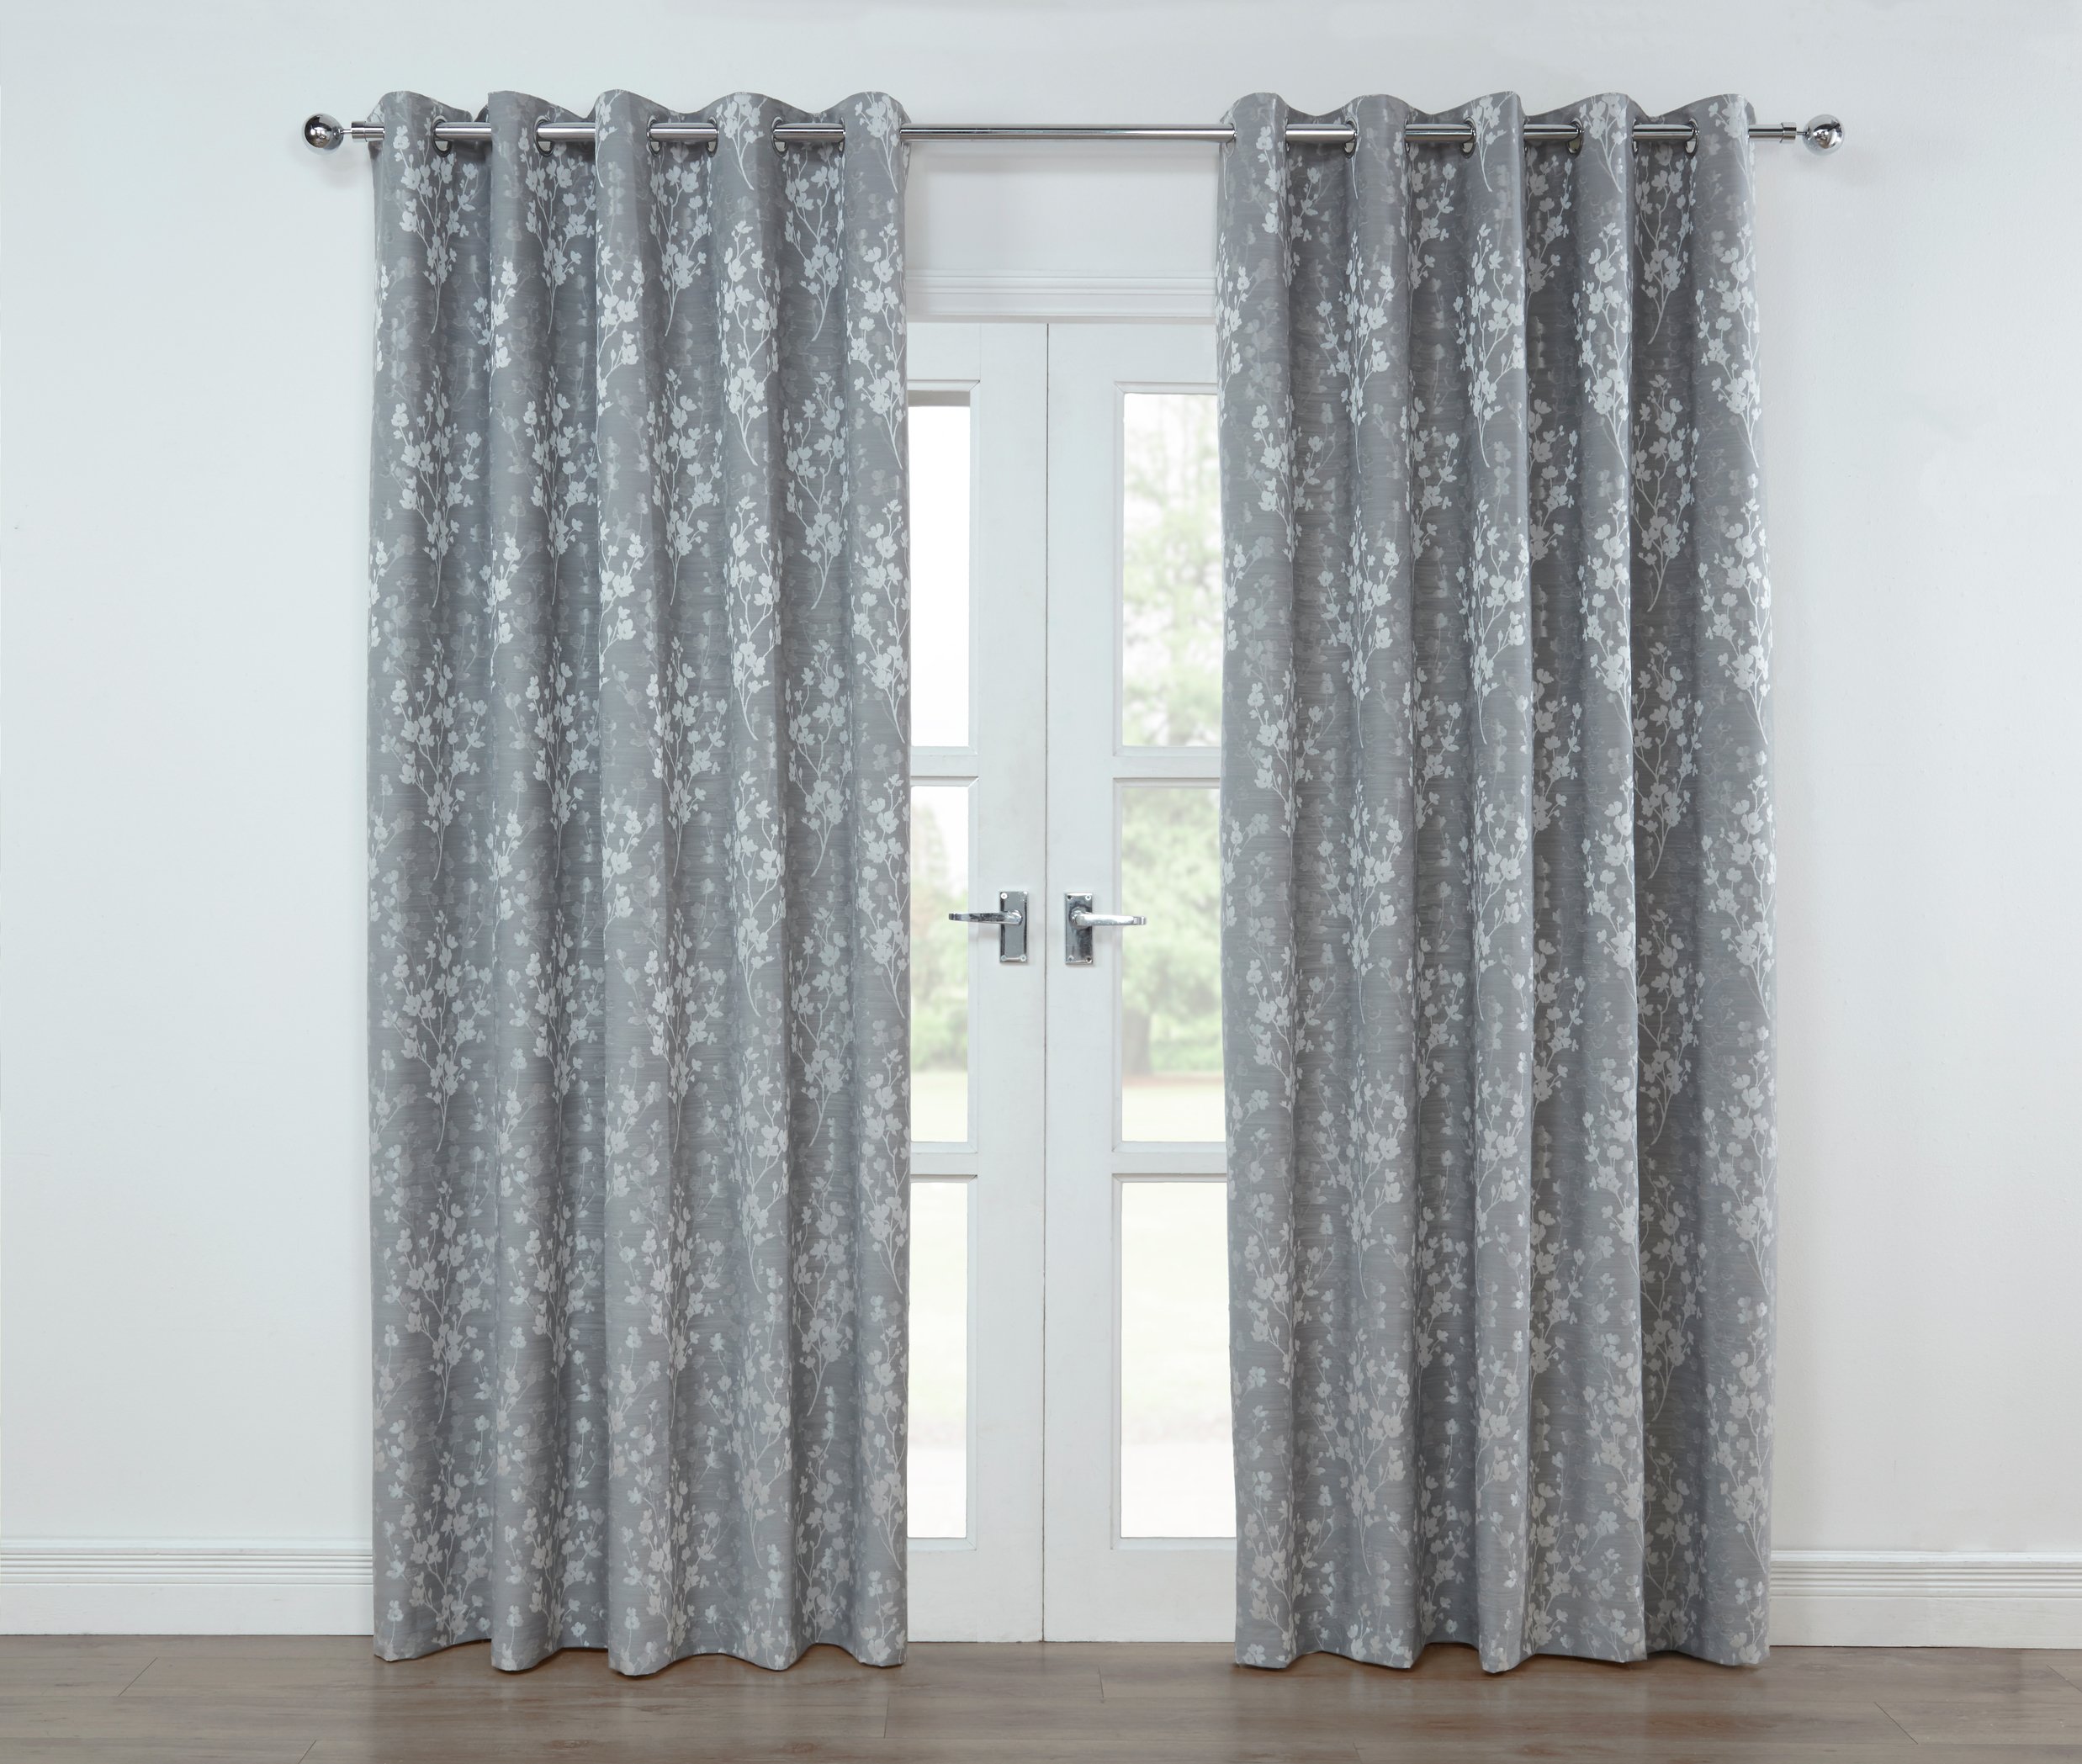 Julian Charles Blossom Lined Curtains - 168x183cm Reviews